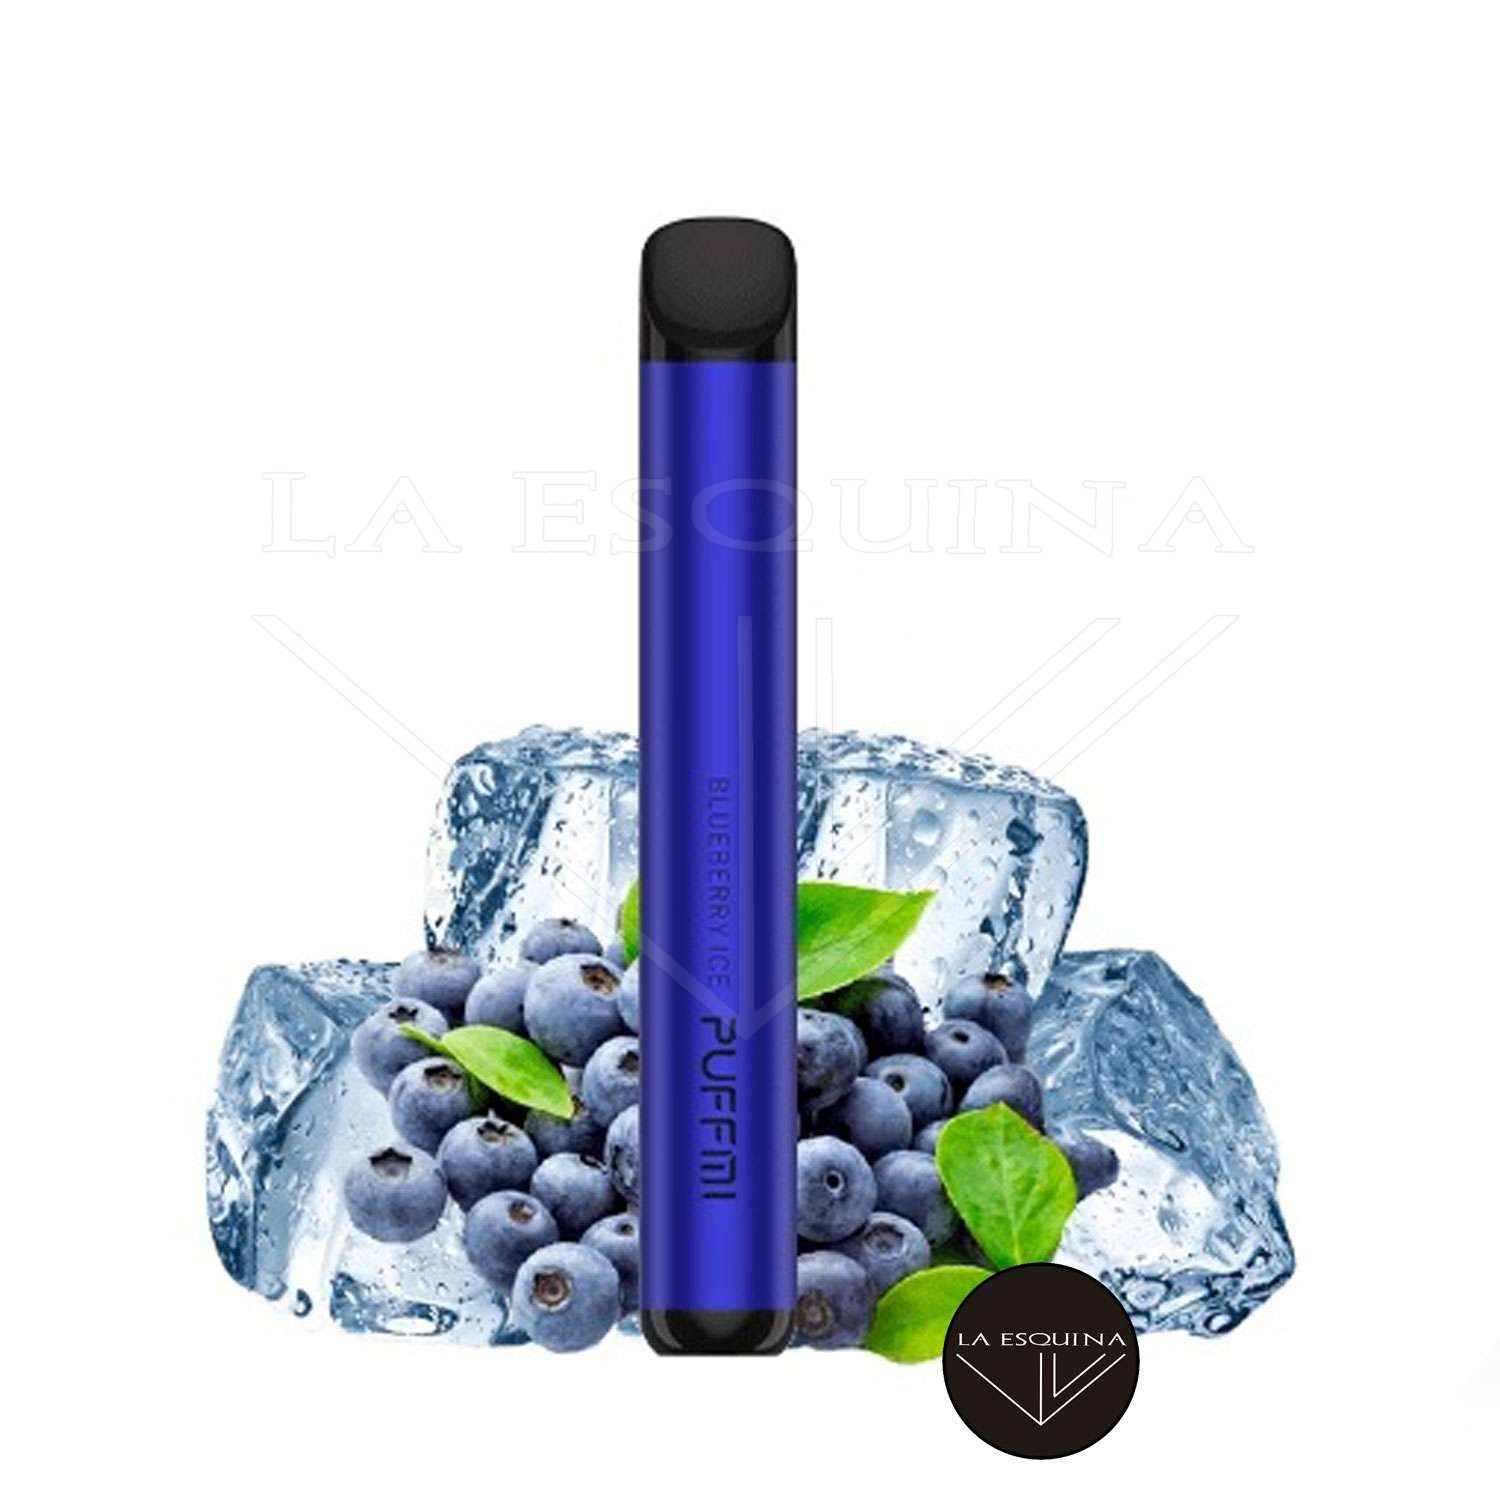 Vaporesso Pod Desechable TX500 Puffmi Blueberry Ice 20mg